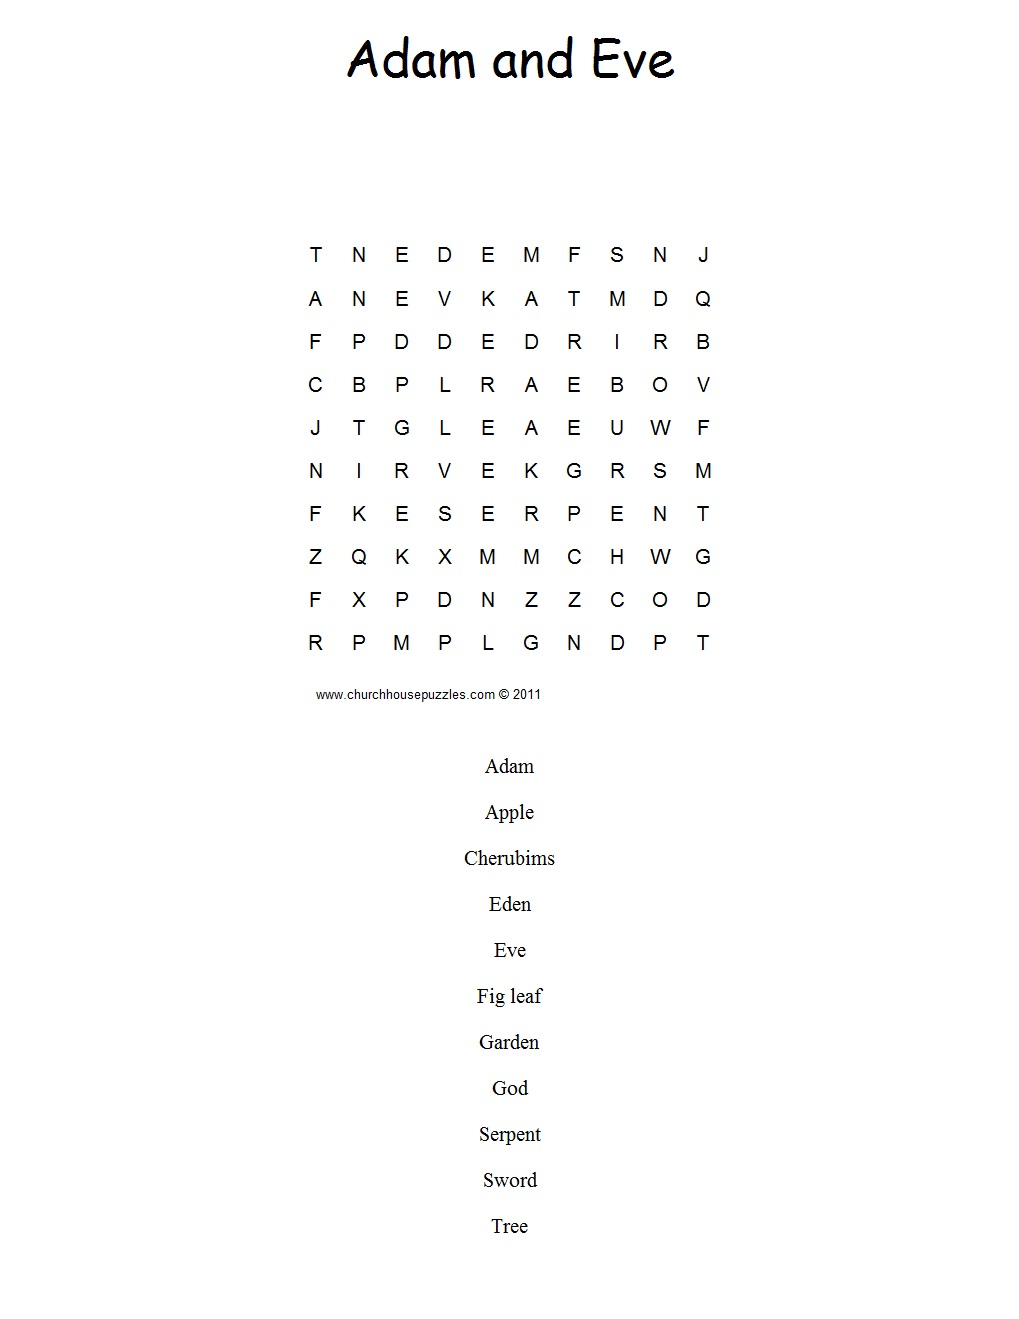 Adam and Eve word find, Adam and Eve word search, Adam and Eve puzzle